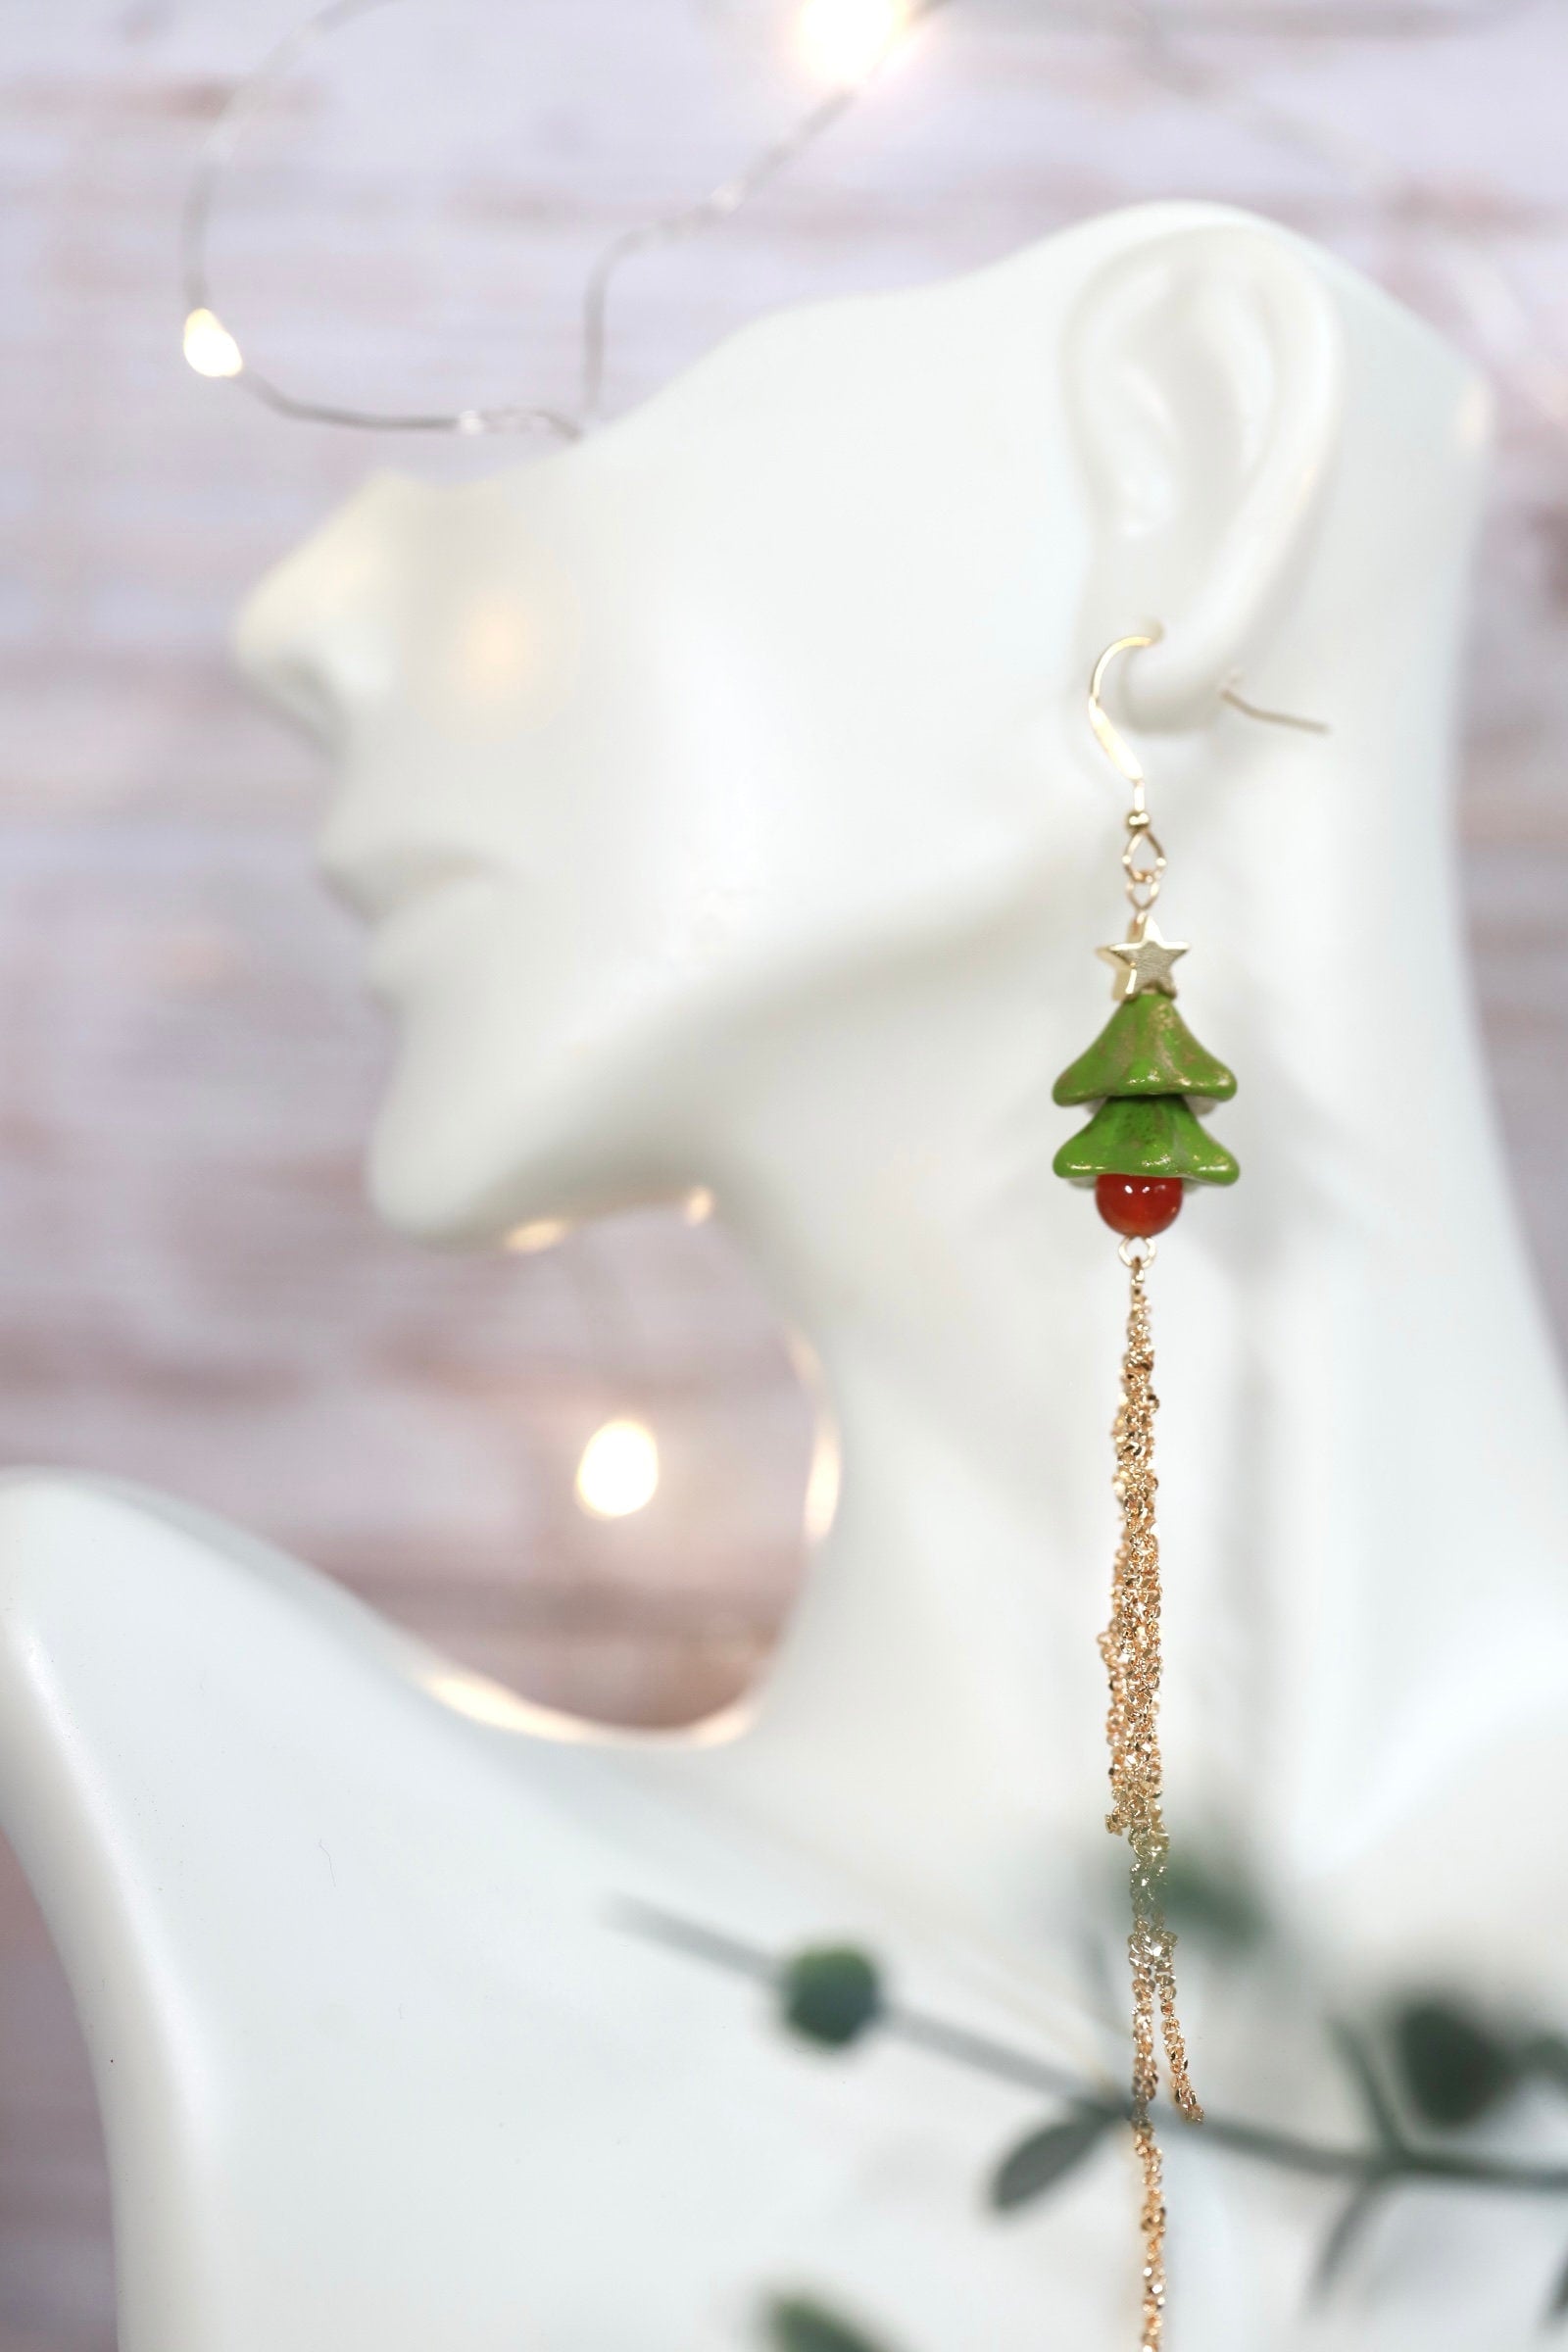 Handmade Czech Bead Christmas Tree Earrings, Holiday Season Accessories, Christmas Outfit, Agate Earrings, Holiday Gift for Ladies